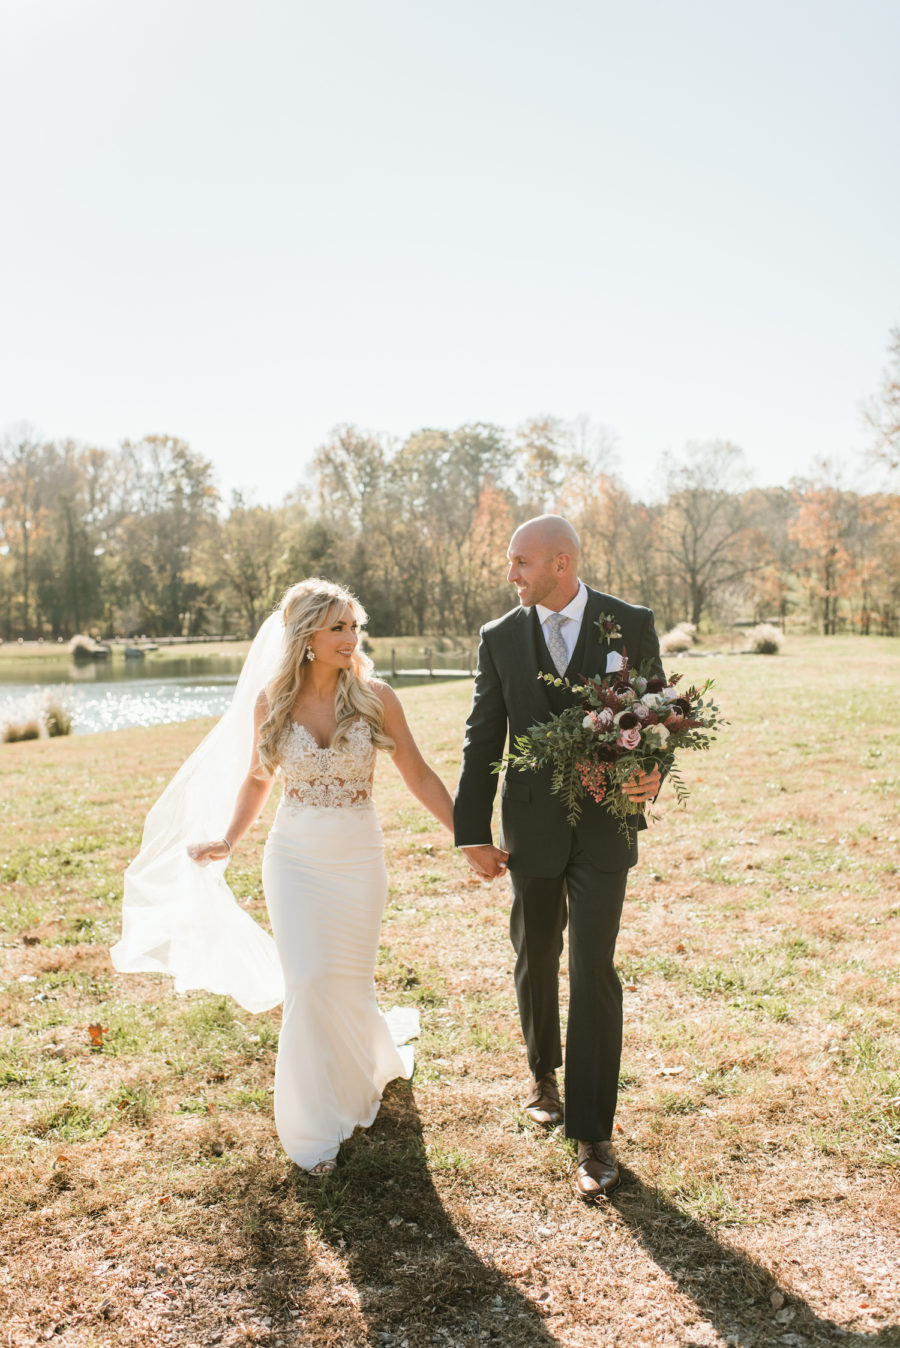 Shelby Rae Photographs featured on Nashville Bride Guide